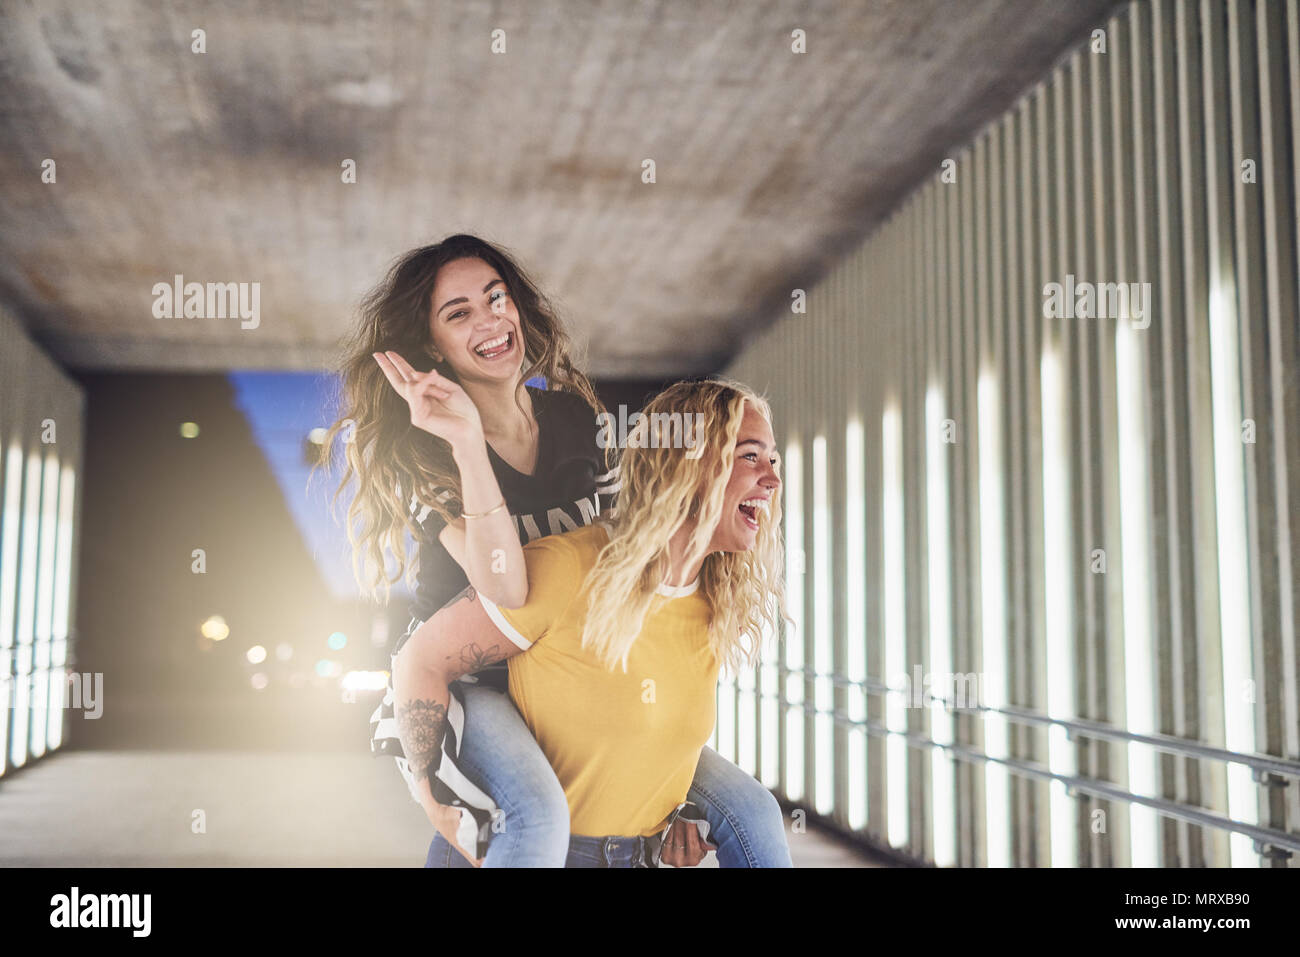 Laughing young woman being carried by her friend while having a fun evening out together in the city Stock Photo